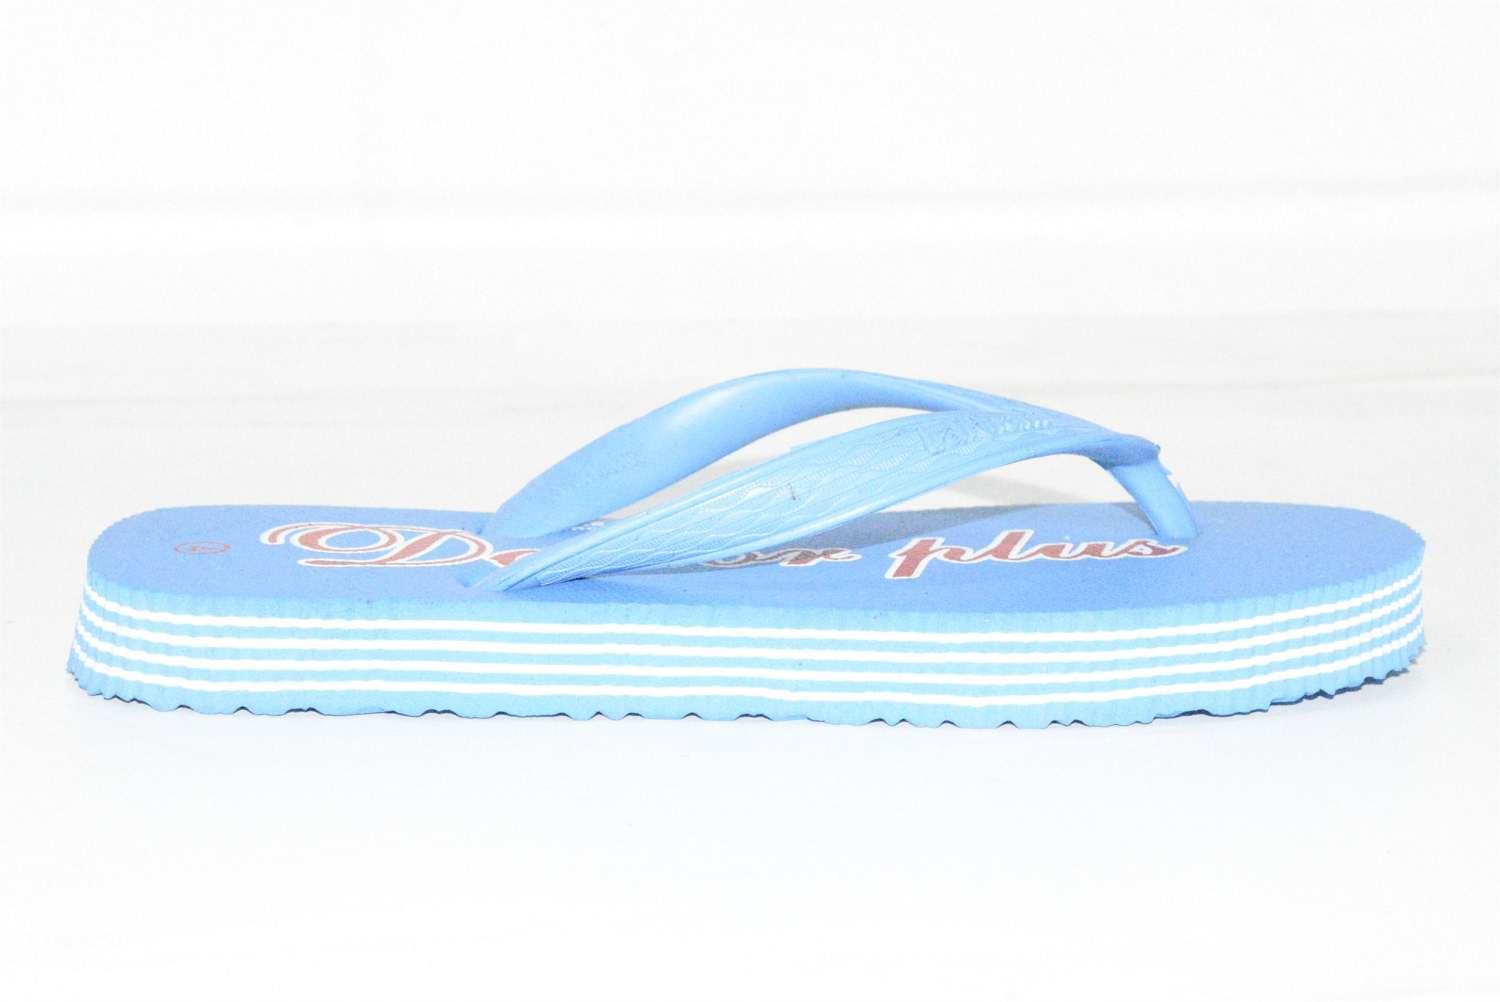 doctor plus slippers lakhani